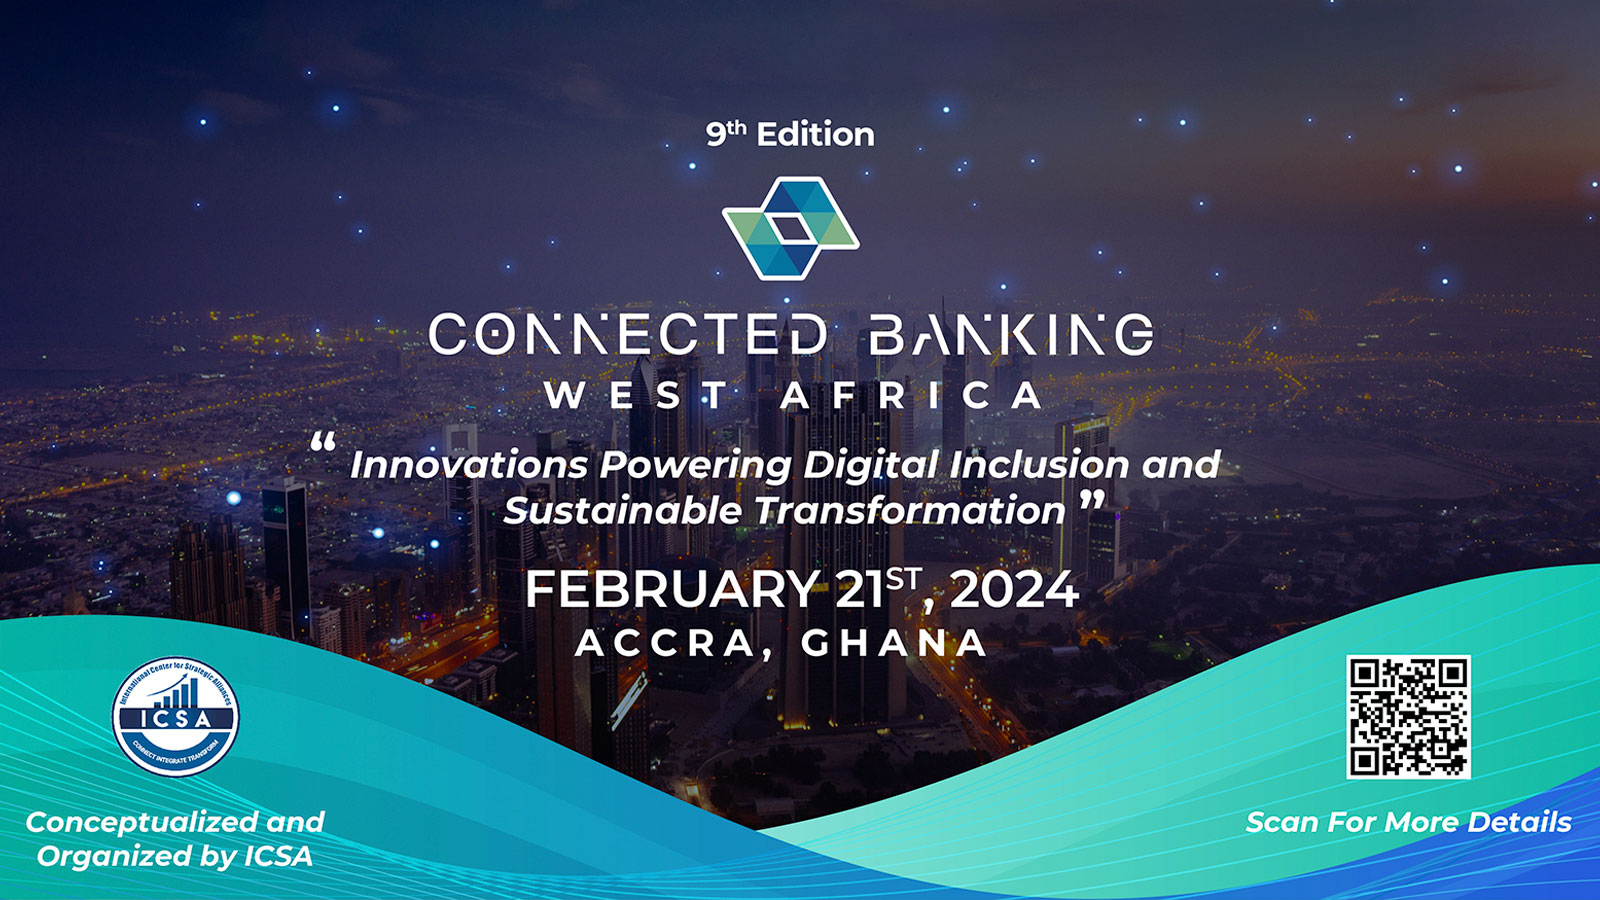 9th Edition Connected Banking Summit - West Africa Innovation & Excellences Awards 2024